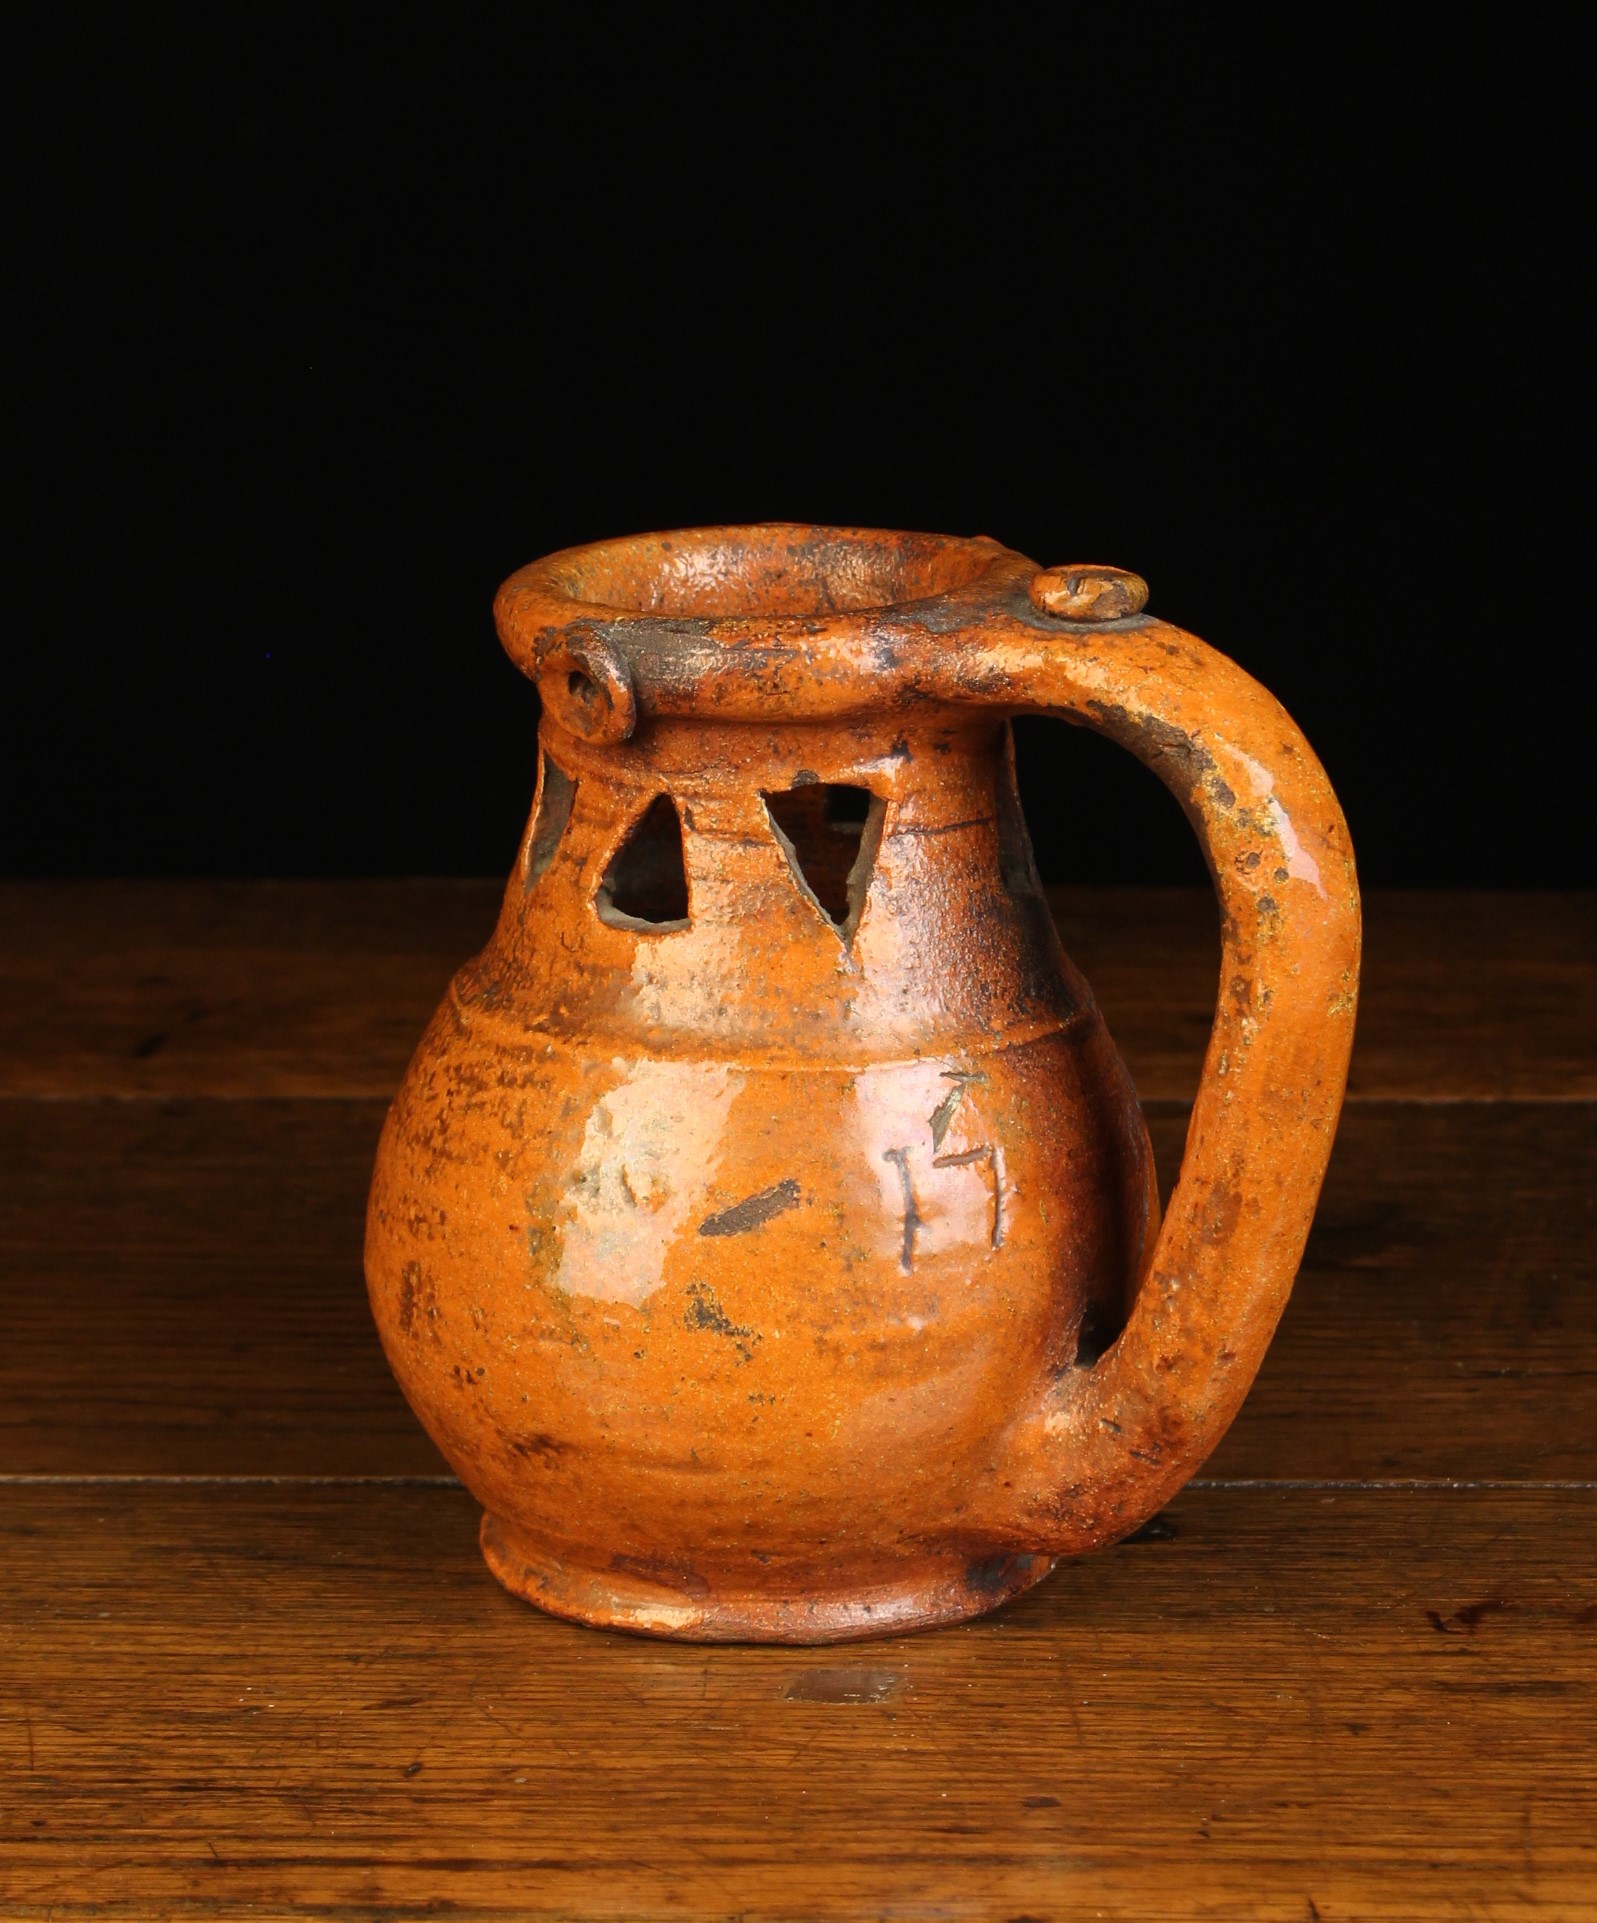 A Small Late 18th Century Orange Glazed Earthenware Puzzle Jug incised with date 1791. - Image 2 of 2